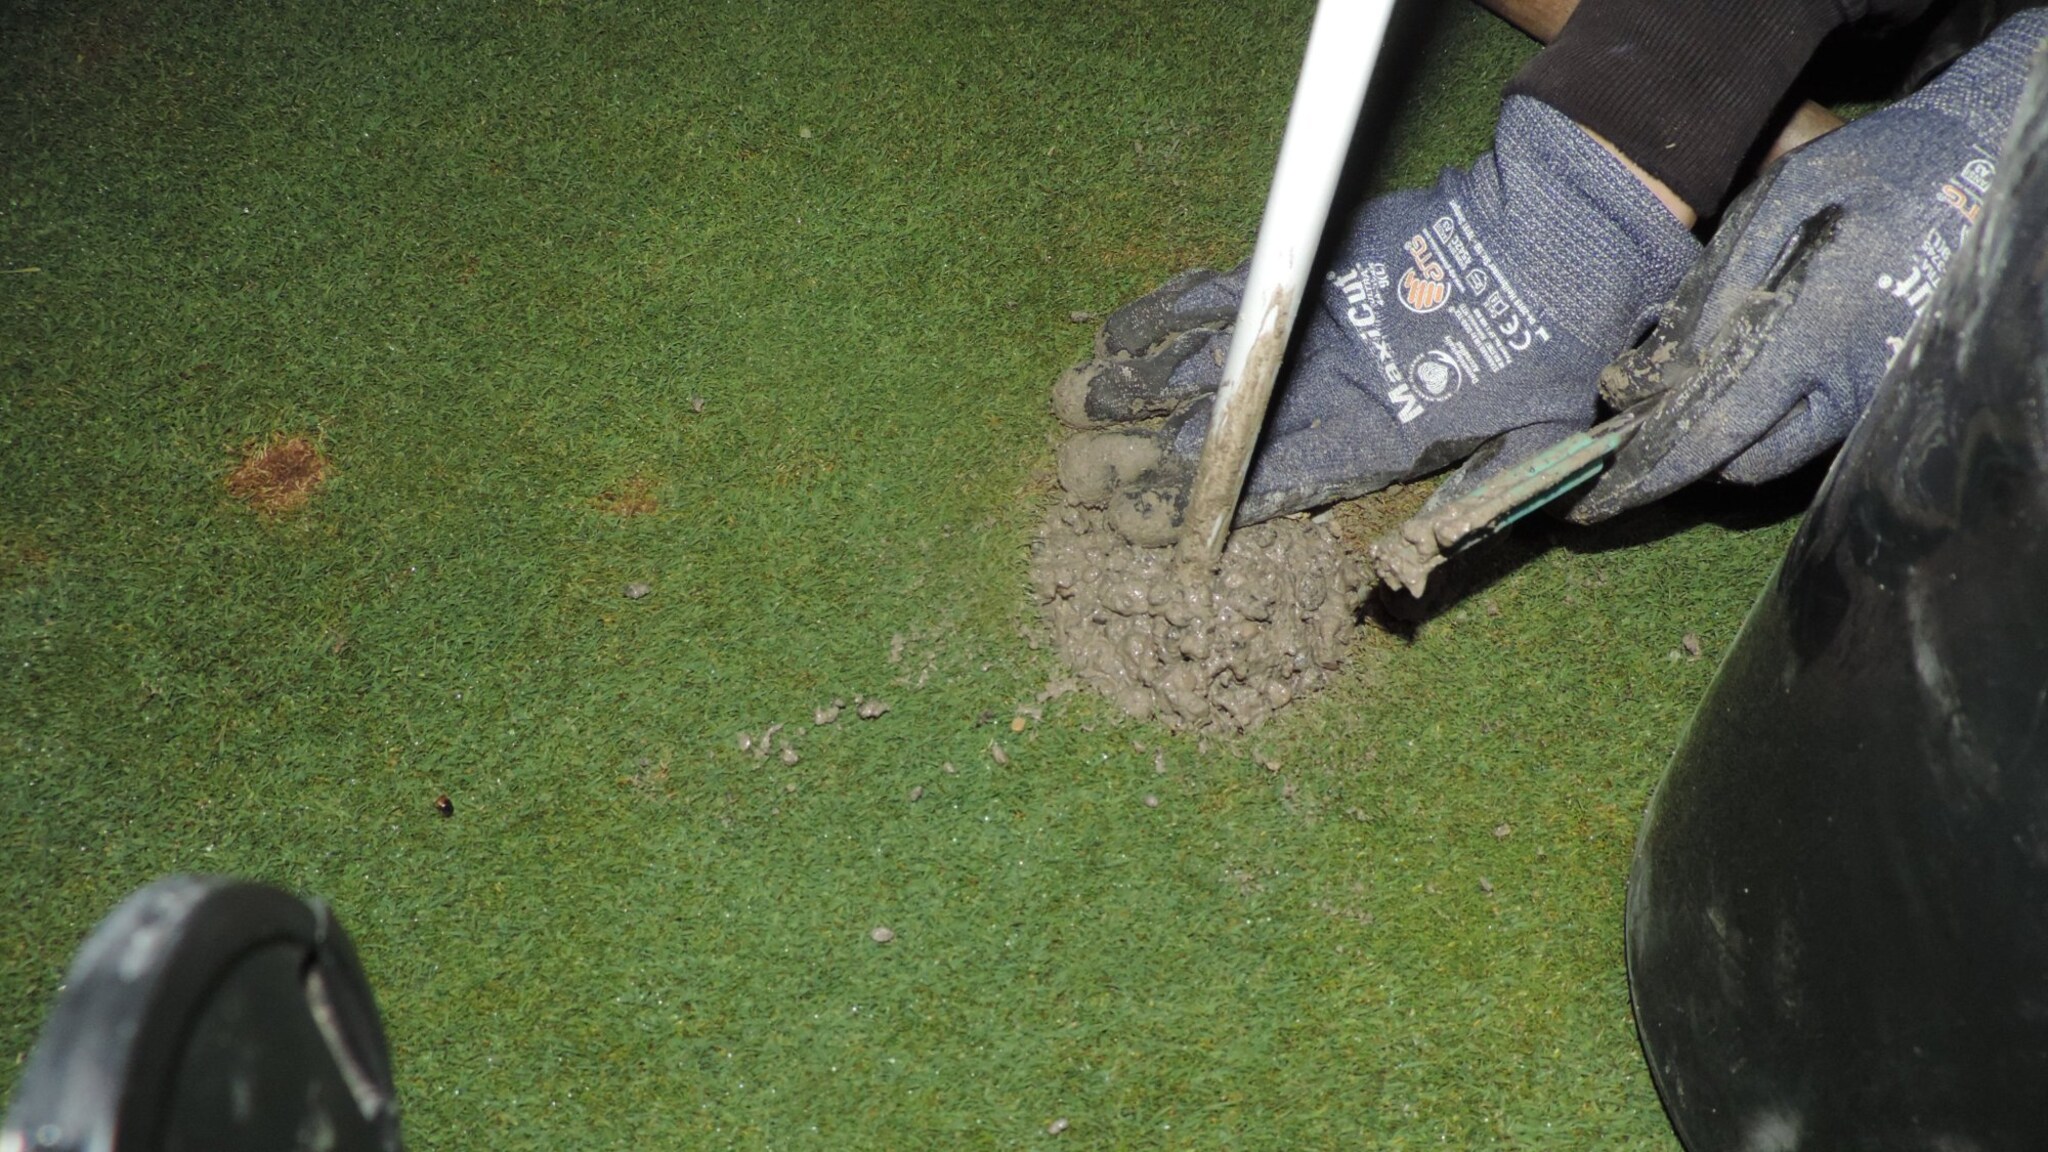 Golf clubs could continue to spray in France: Climate activists fill holes with cement